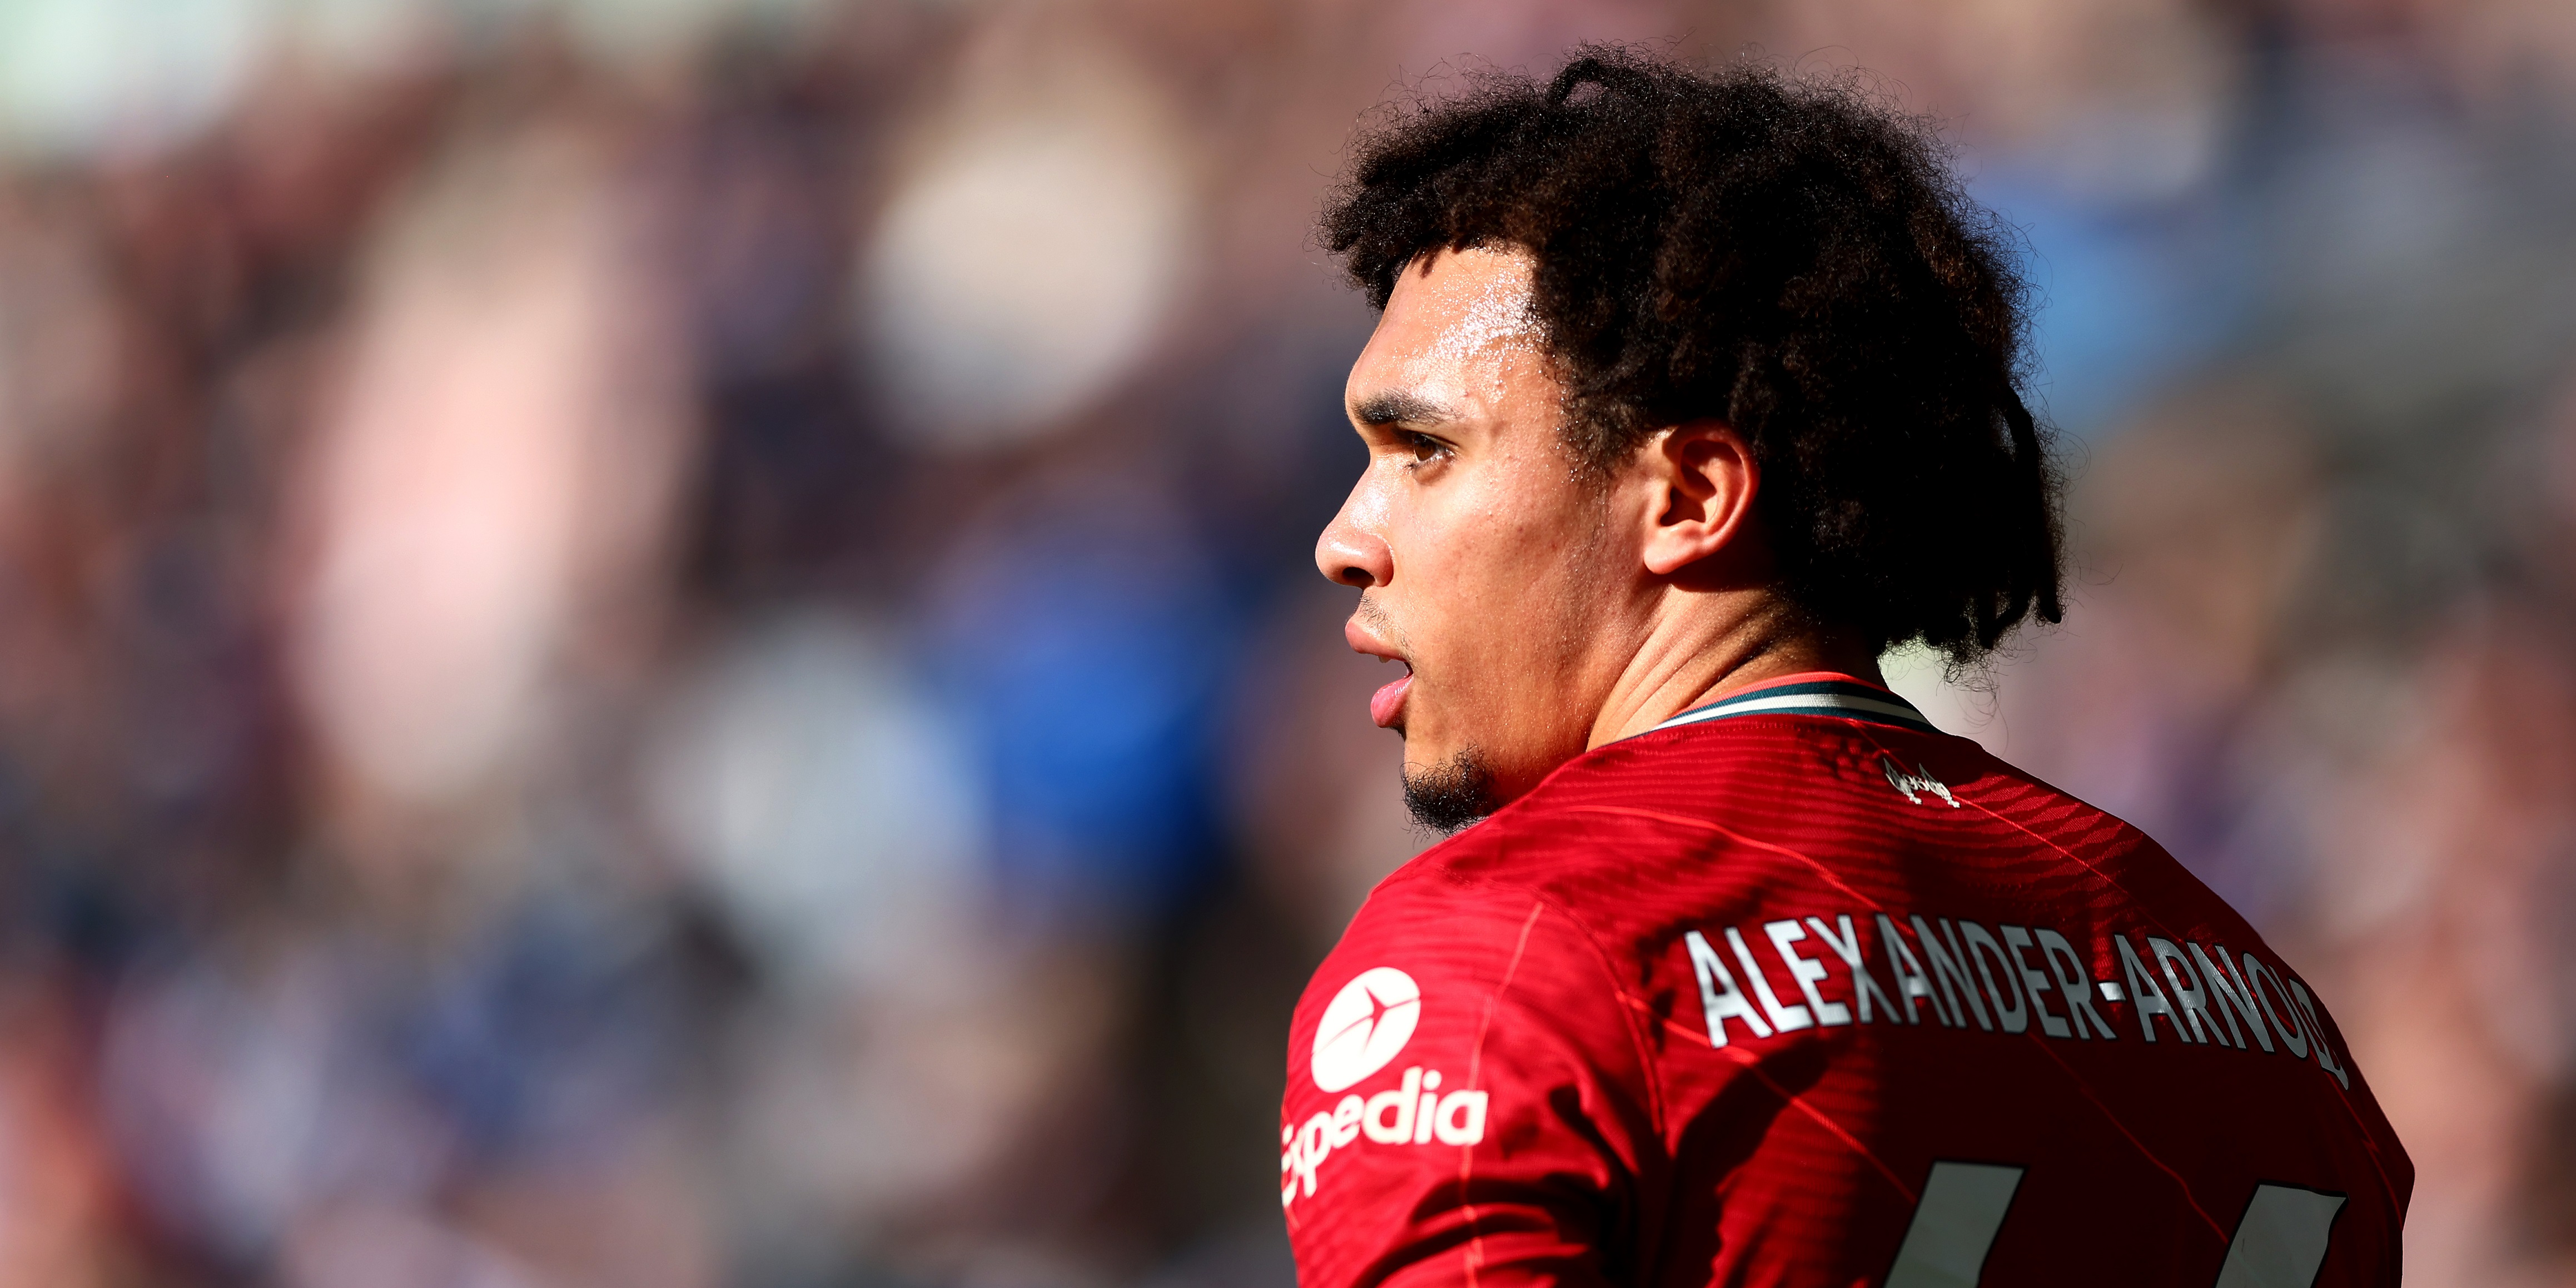 Trent Alexander-Arnold weighs in on Mo Salah’s ‘revenge’ comments and claims this weekend’s clash with Real Madrid is ‘personal’ for the Egyptian